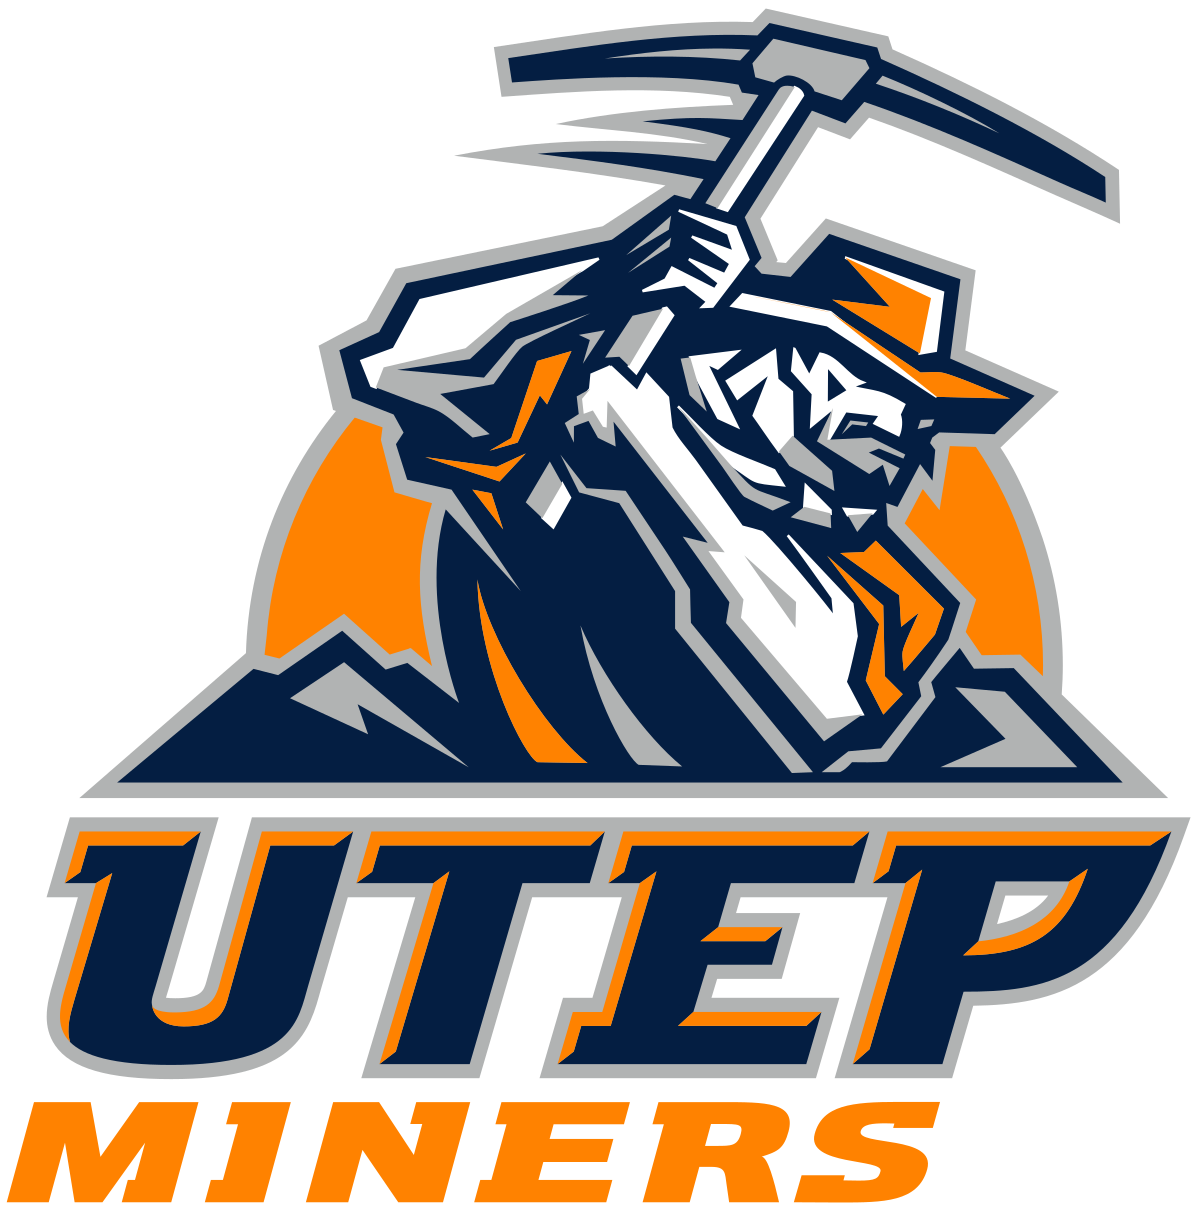 UTEP_Miners_logo.svg.png